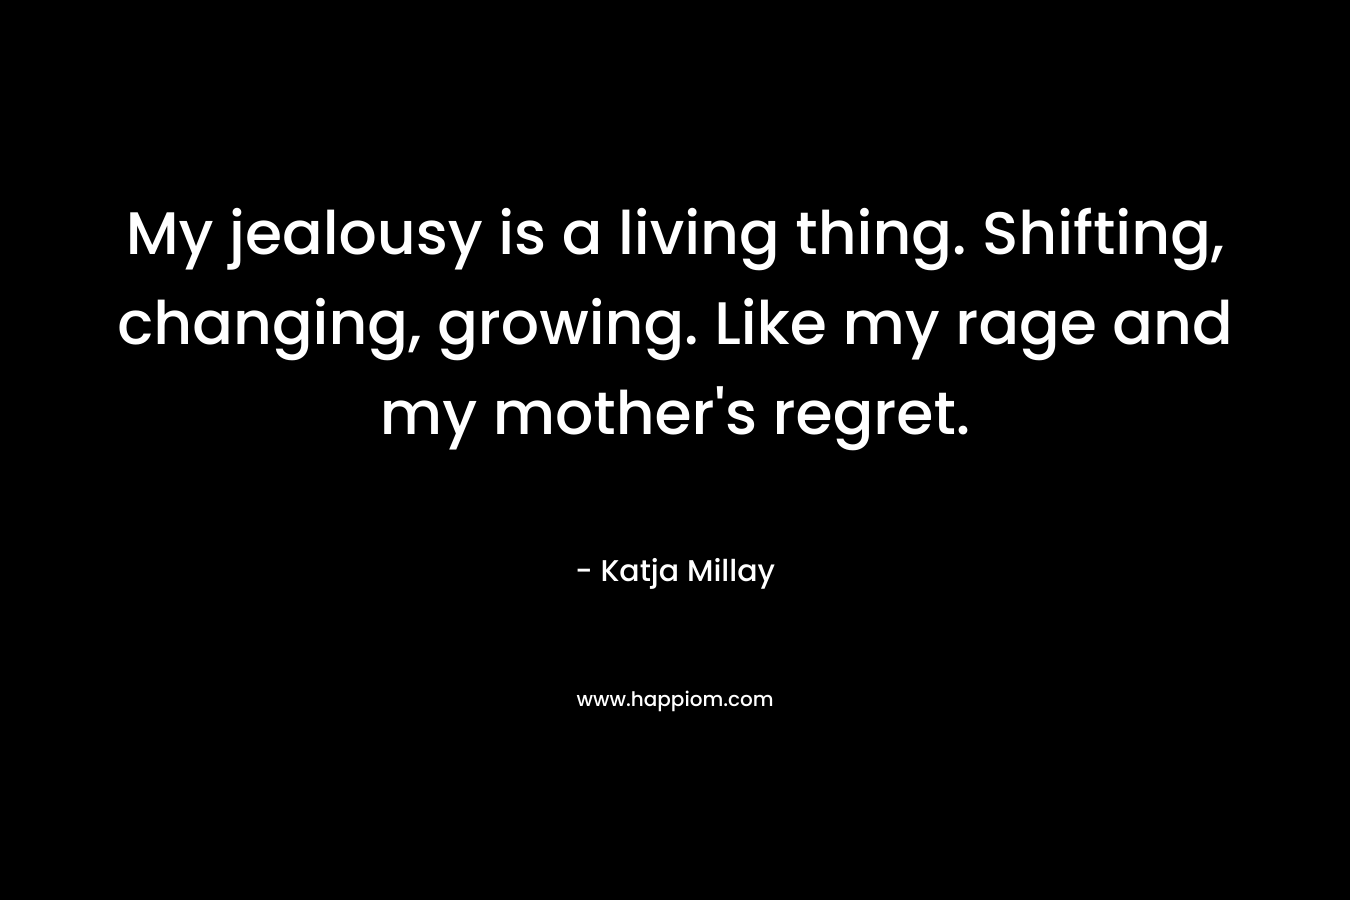 My jealousy is a living thing. Shifting, changing, growing. Like my rage and my mother's regret.